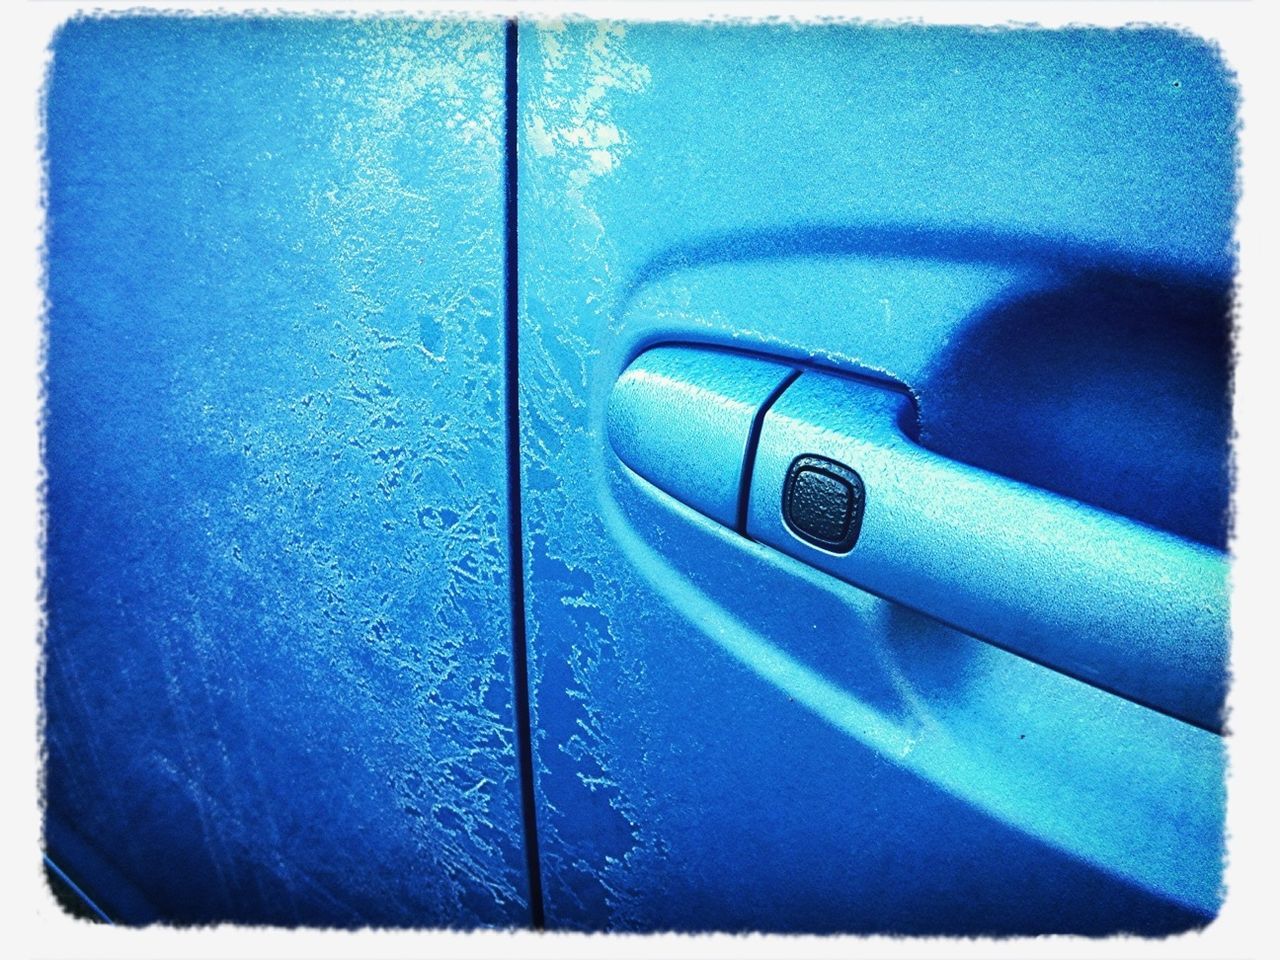 blue, transfer print, auto post production filter, technology, close-up, indoors, transportation, metal, part of, equipment, protection, mode of transport, connection, no people, car, safety, land vehicle, day, still life, high angle view